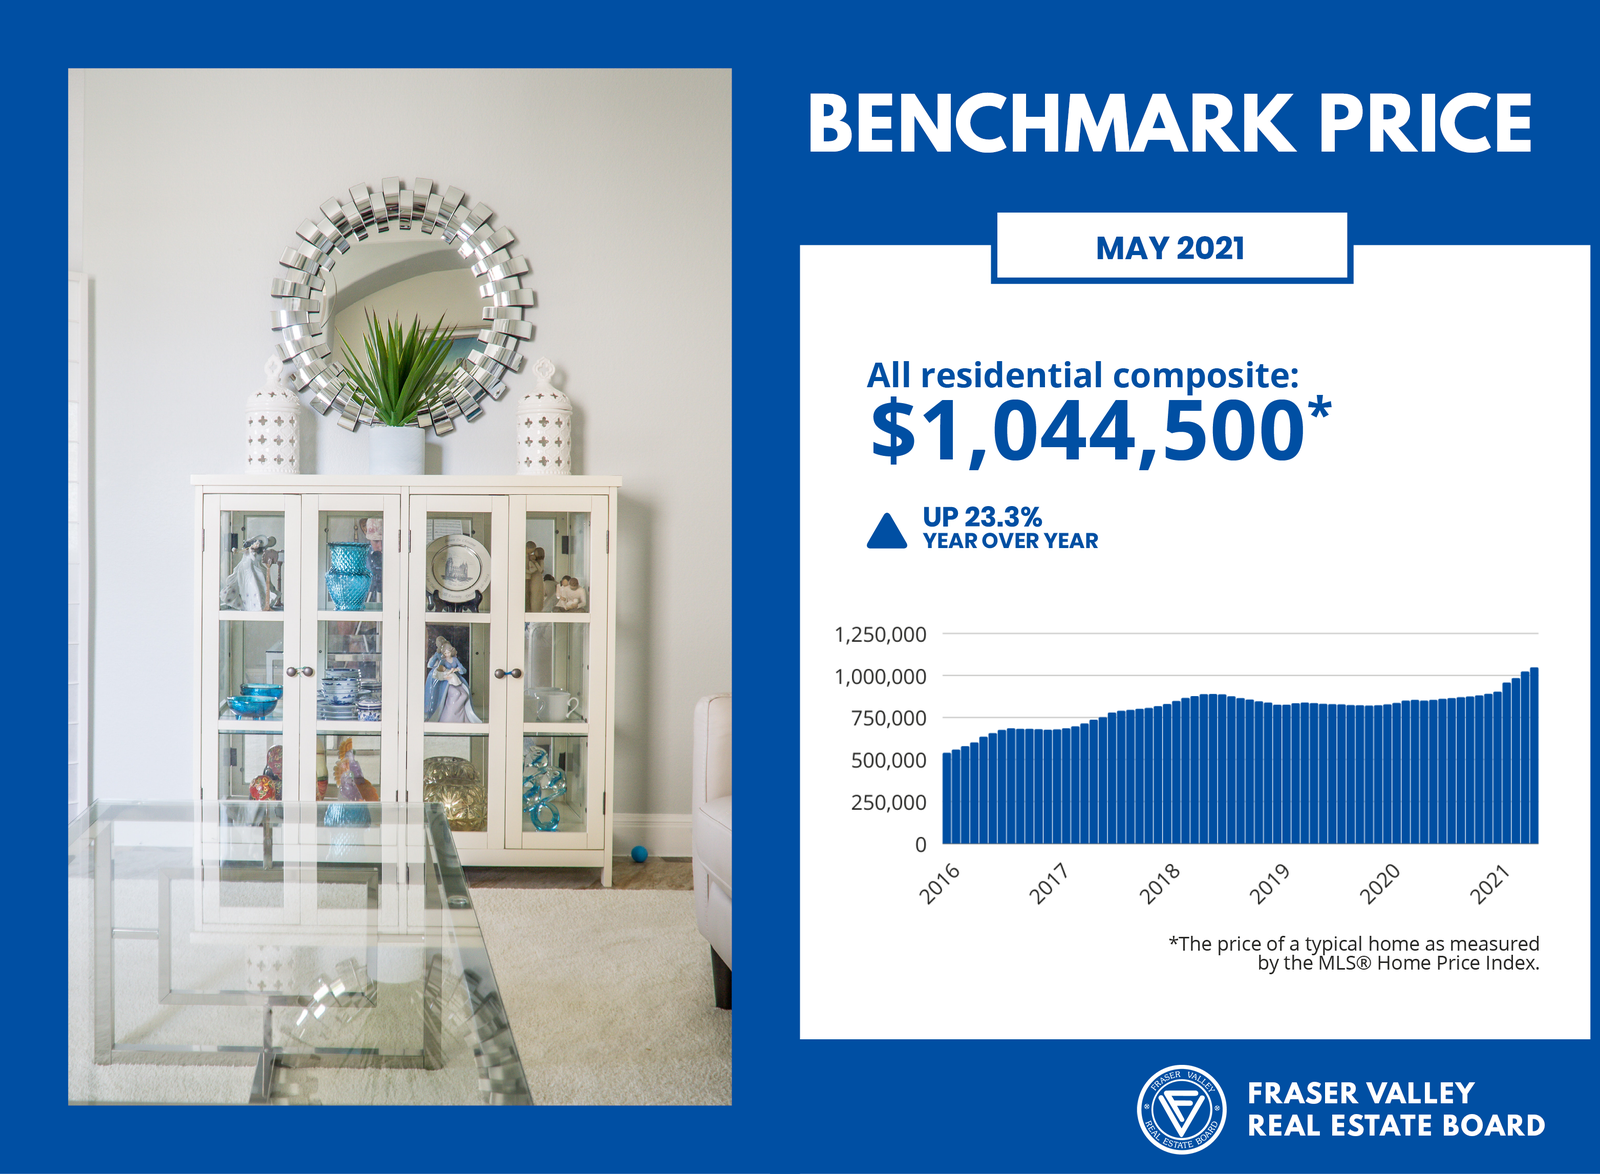 Benchmark Price for May 2021 - Fraser Valley Real Estate